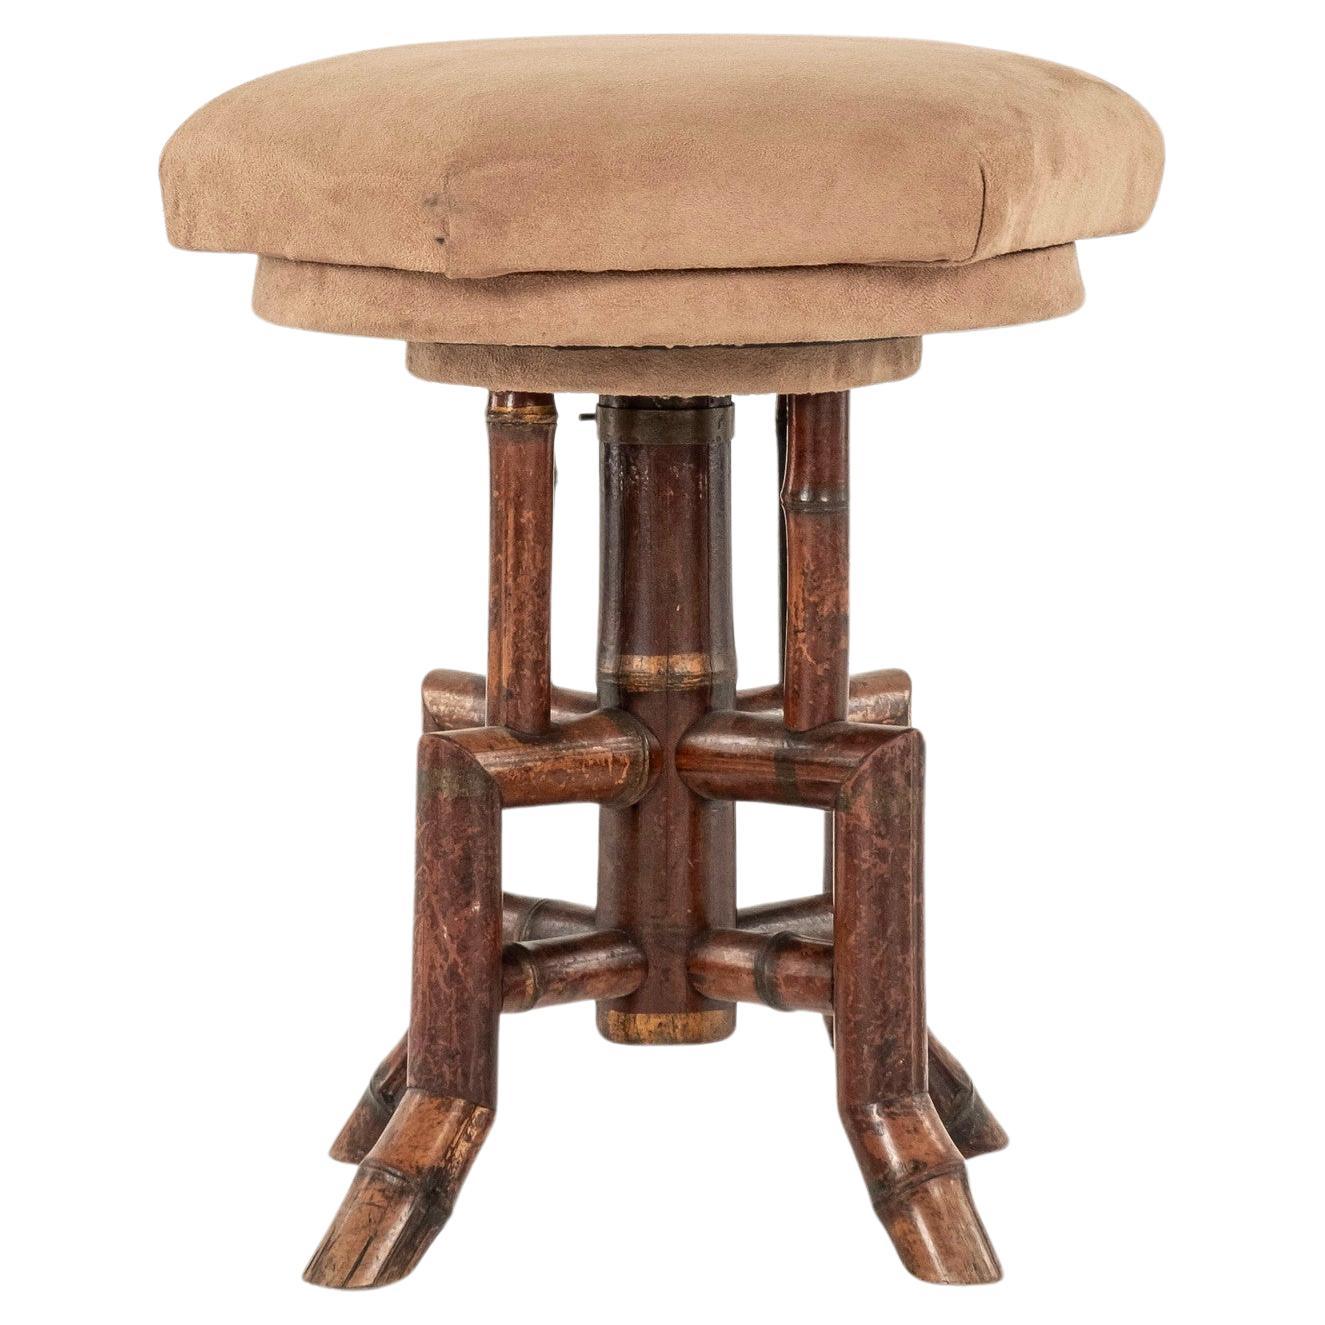 Early 20th Century French Bamboo Swivel Stool For Sale